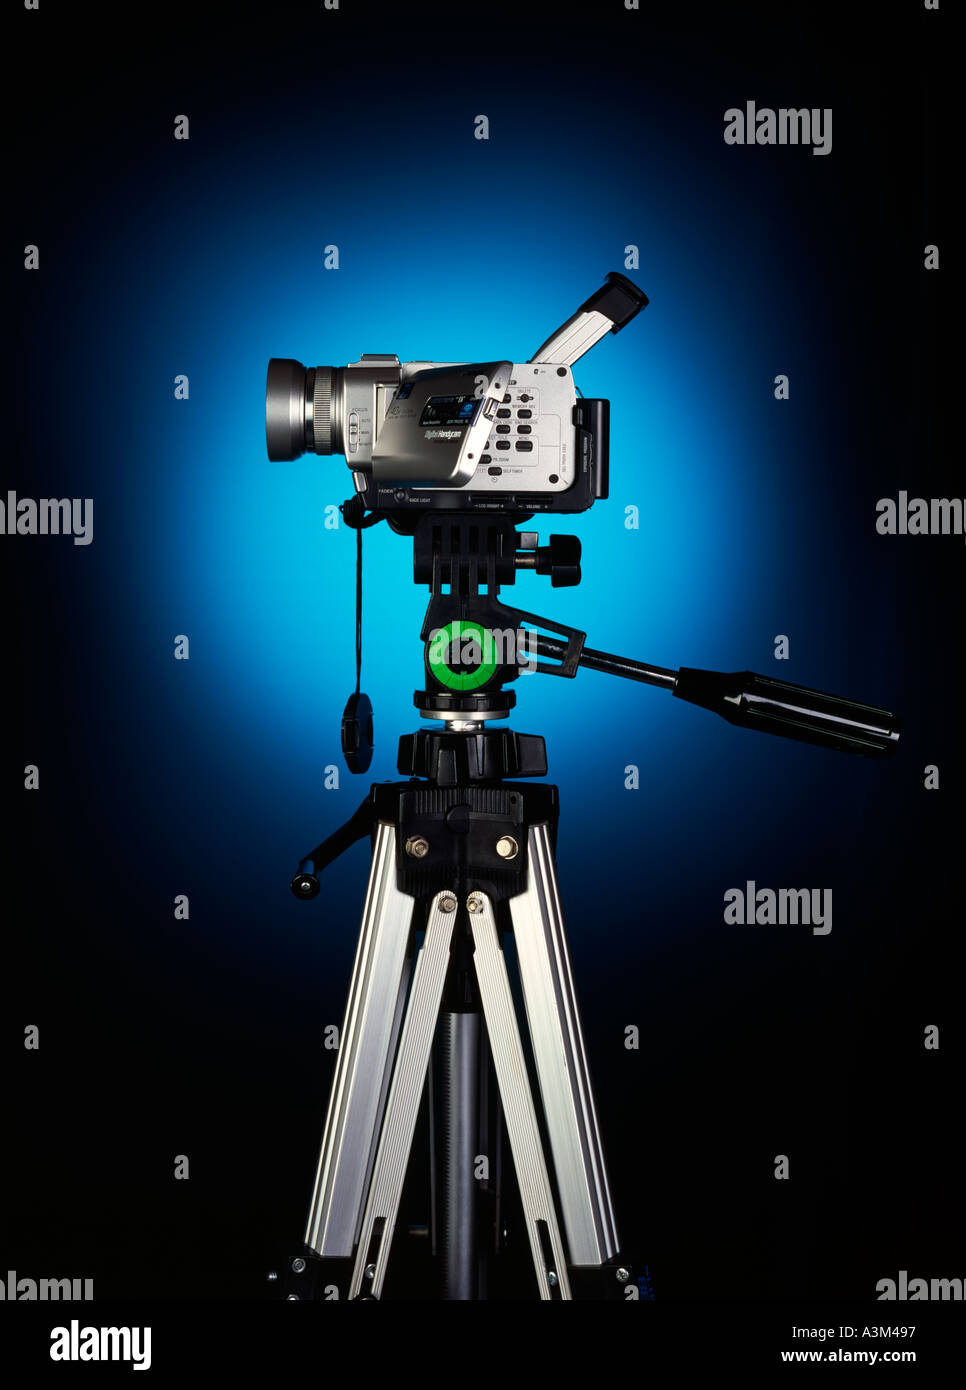 video camera on a tripod witha blue glow behind Stock Photo